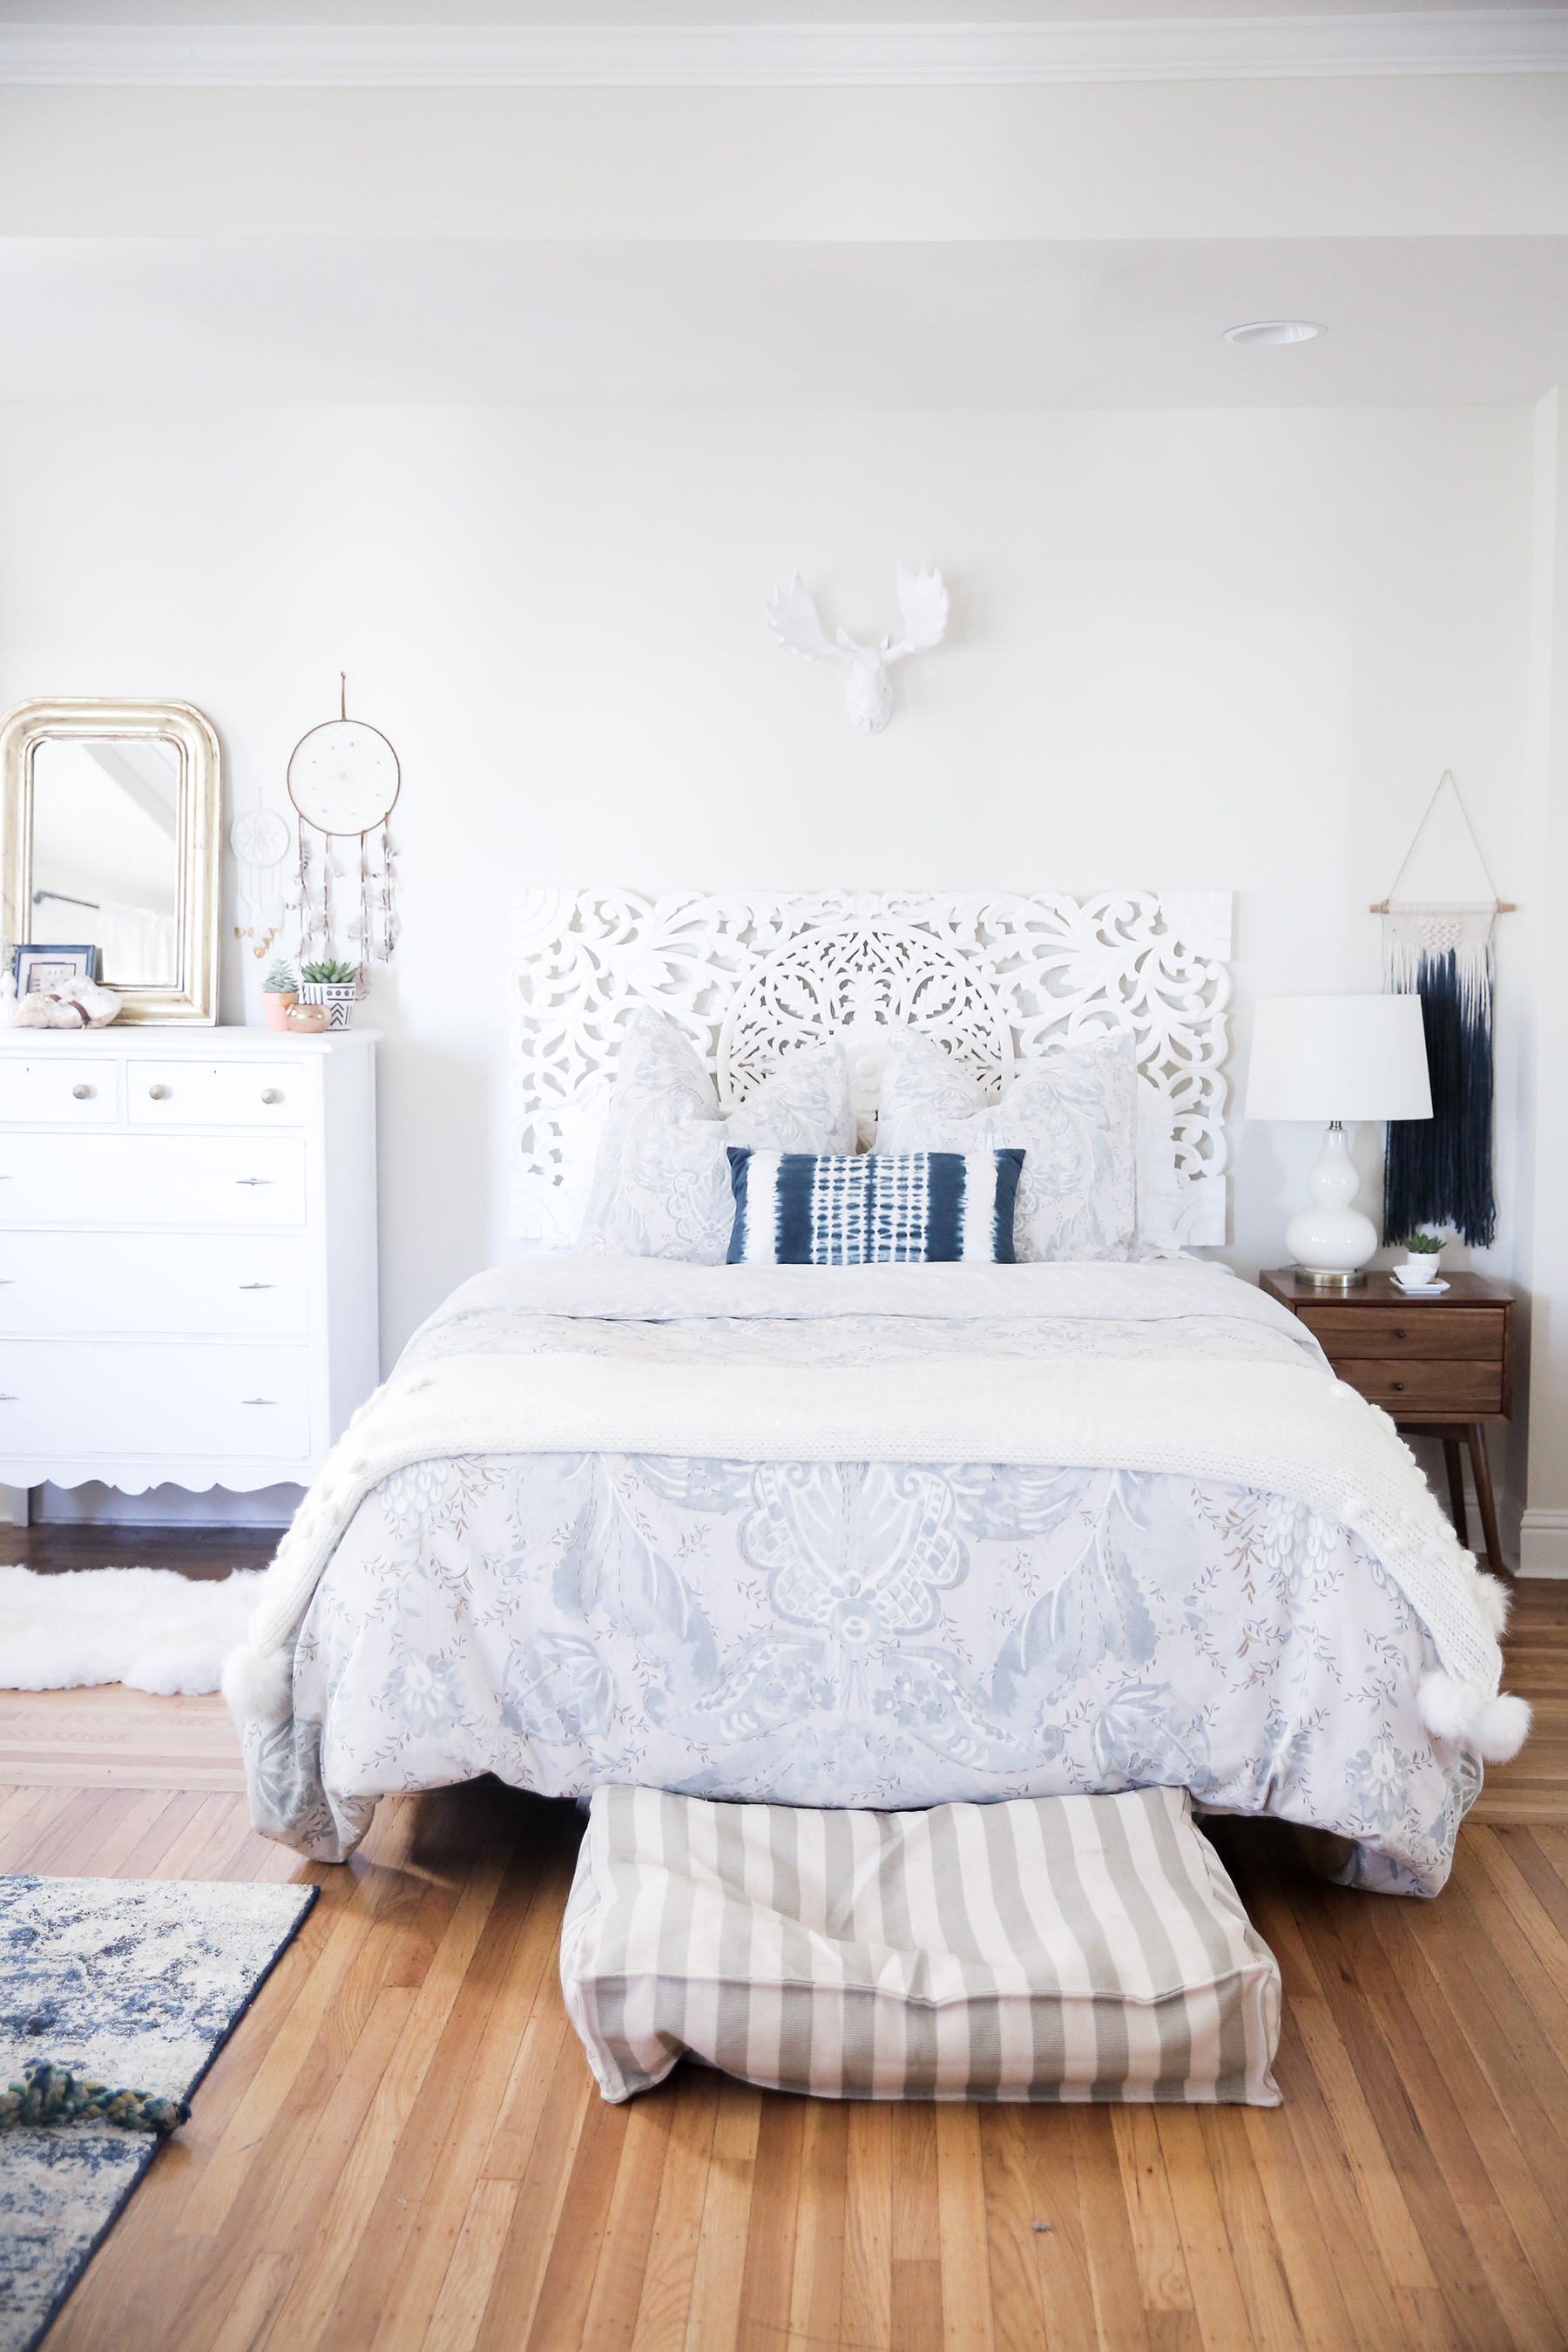 top 10 popular posts of 2015 from Advicefroma20Something.com, all white bedroom, white and blue bedroom, urban outfitters home decor, anthropologie home decor, white headboard, stylish dog bed, anthropologie bedding, boho decor, bright bedroom ideas, decor ideas